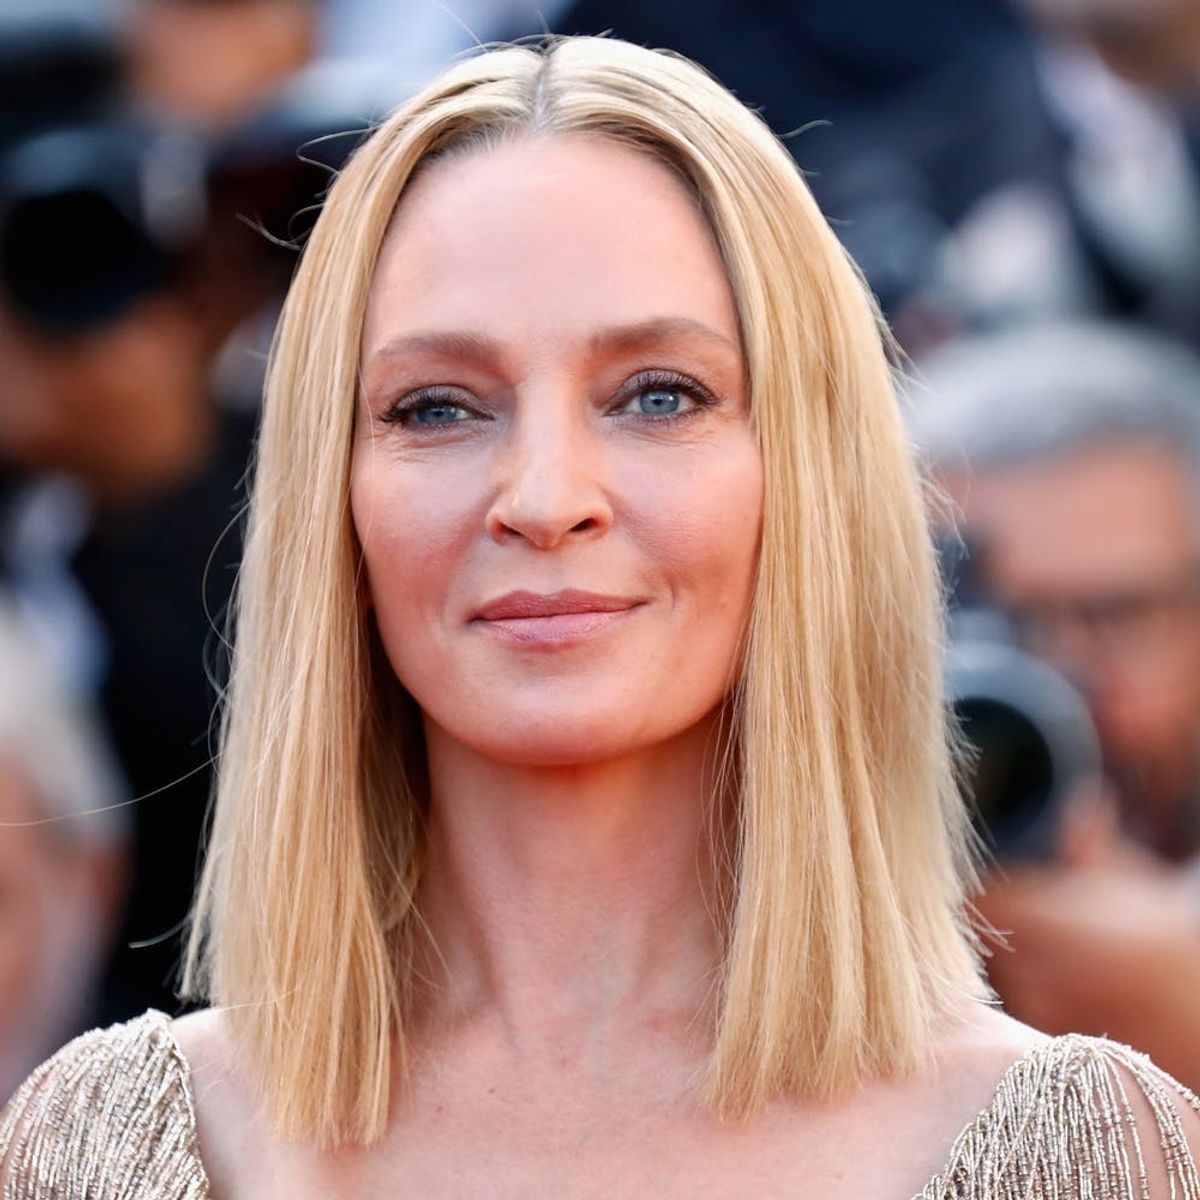 Uma Thurman Posted a Scathing Message to Harvey Weinstein